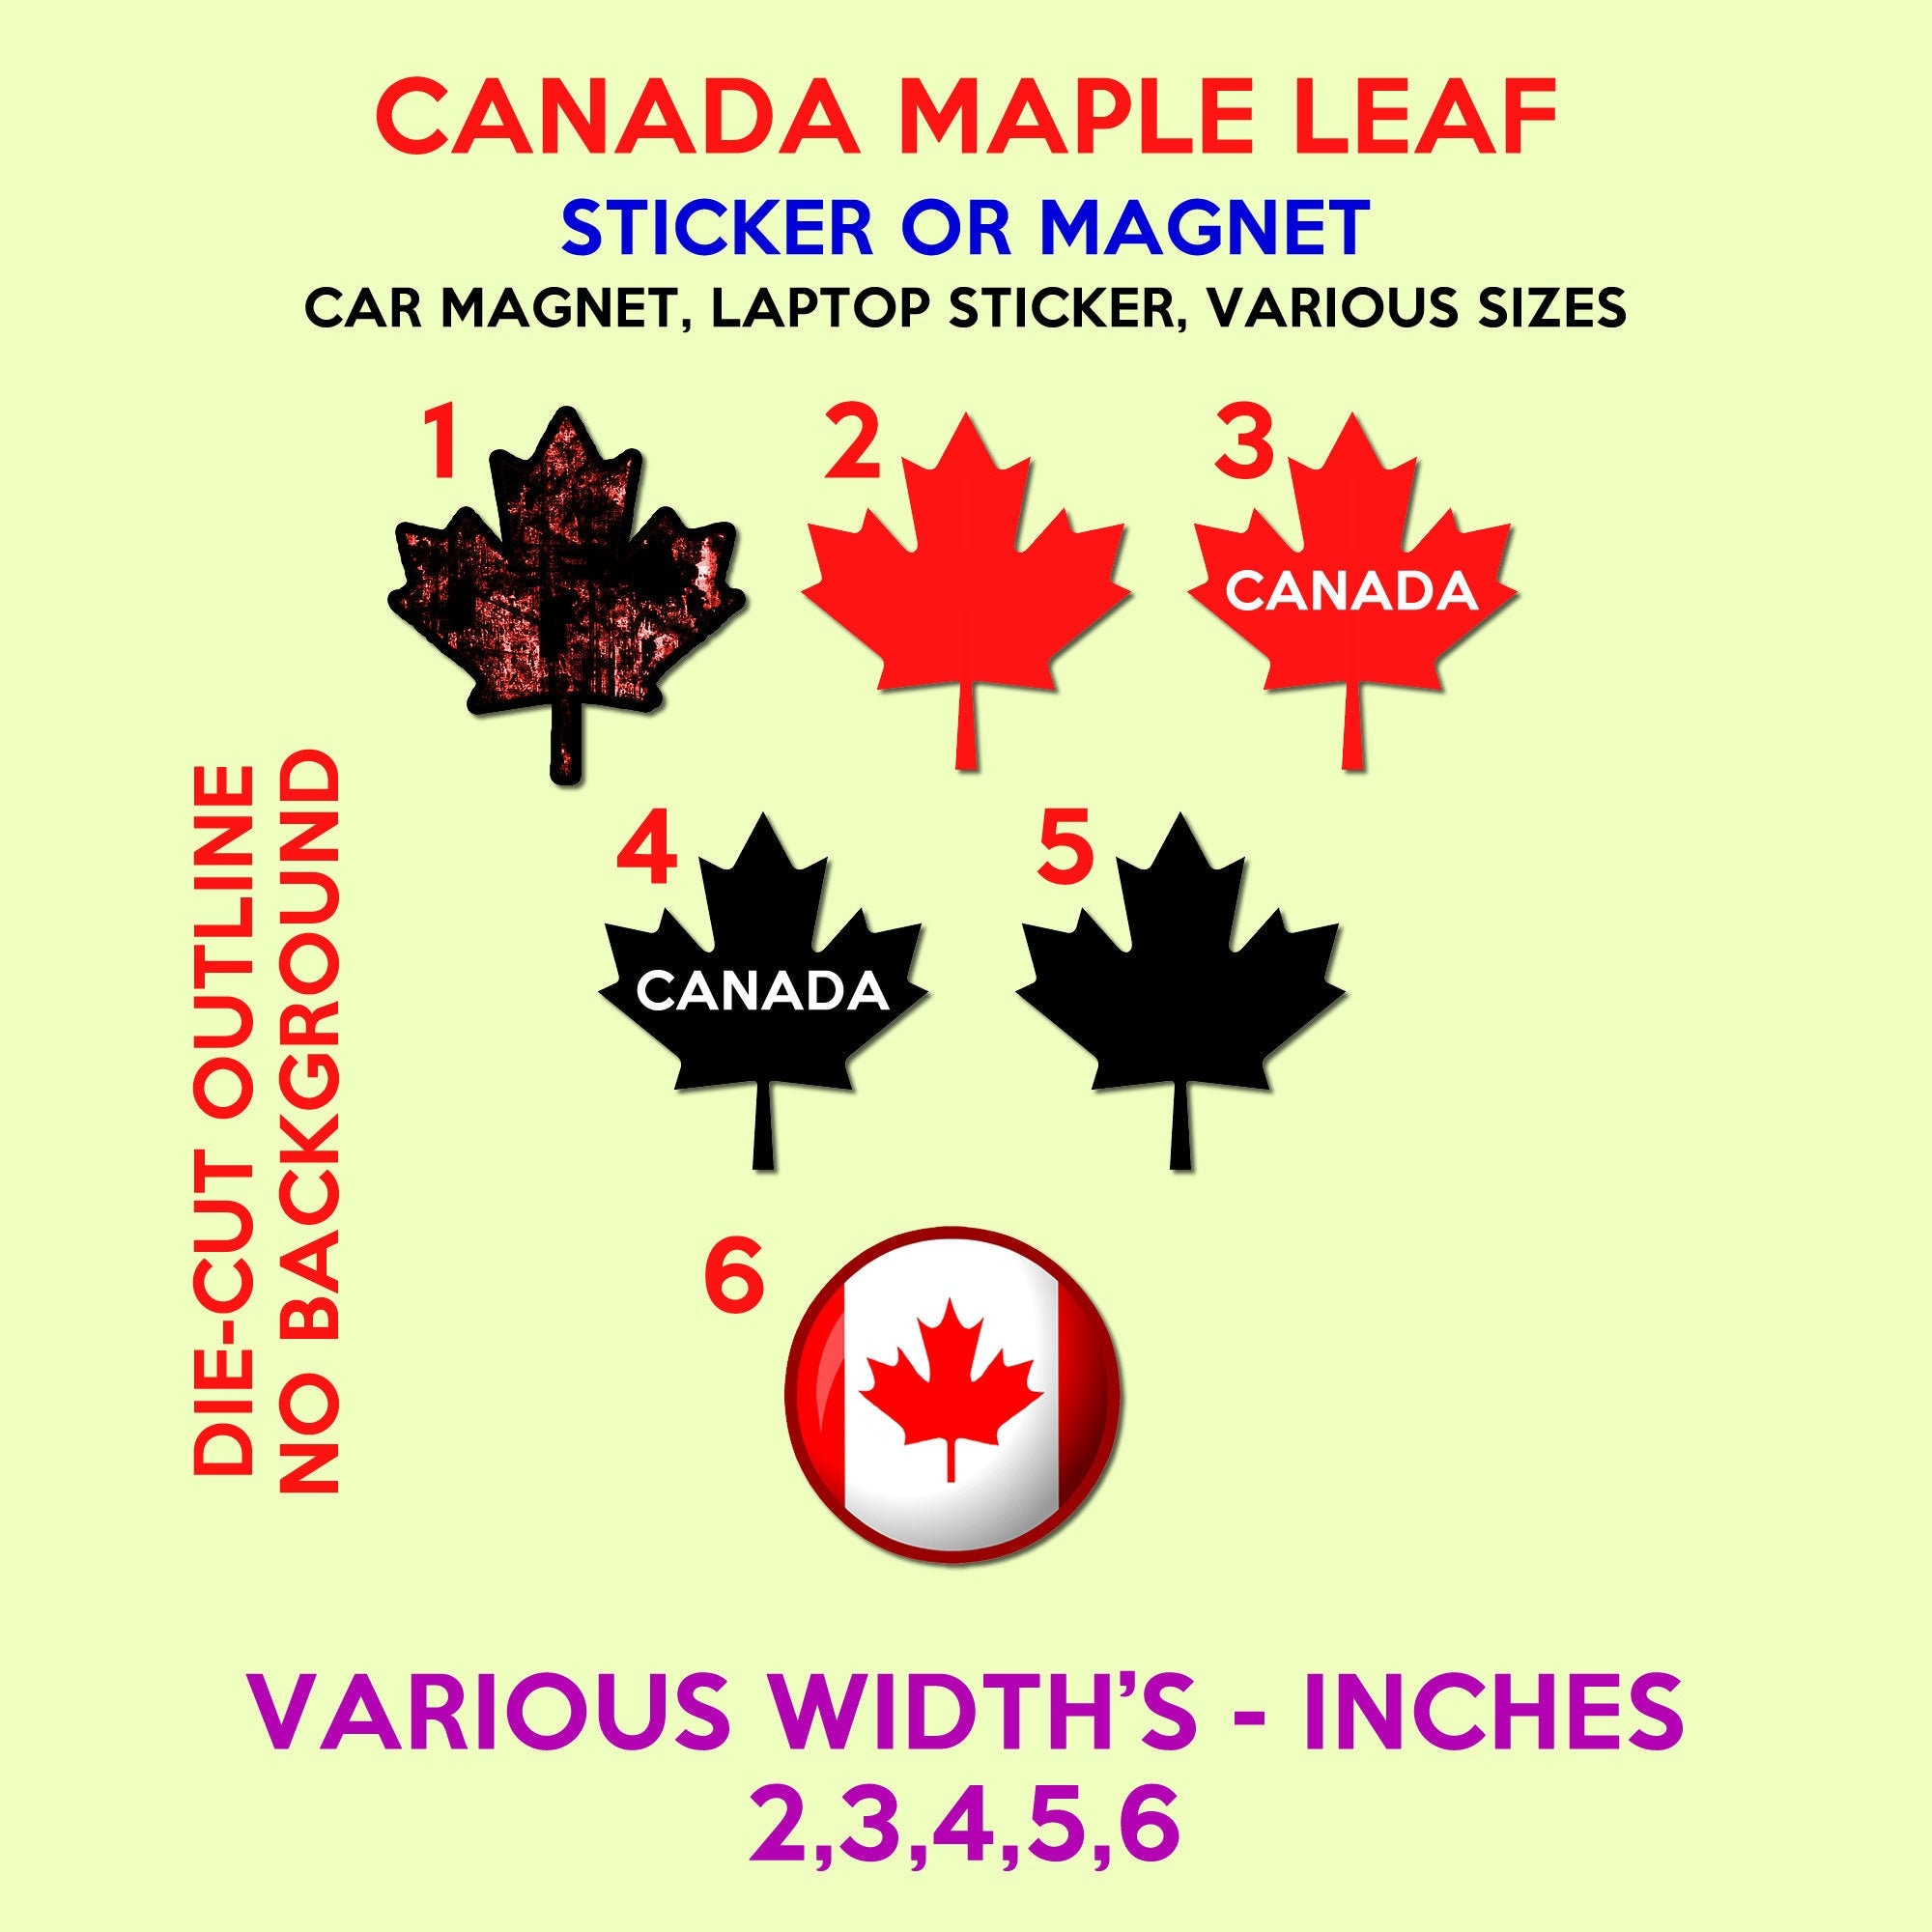 5 Canada Maple Leaf Stickers or Magnets, Car, Fridge, Laptop, Water Bottle, you name it stick it.  Various sizes available